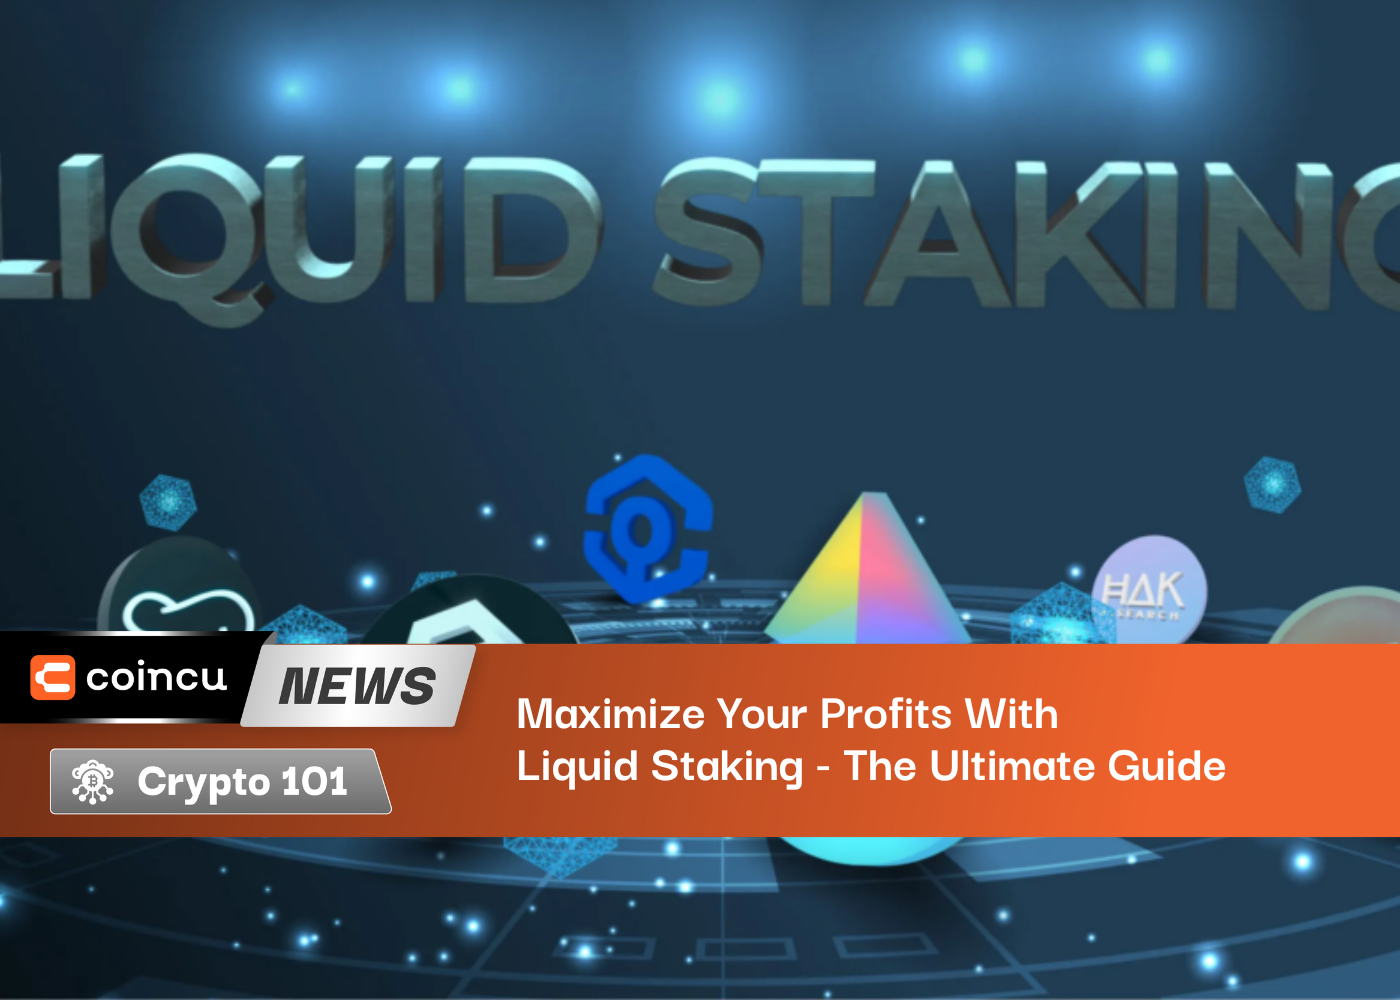 Maximize Your Profits With Liquid Staking - The Ultimate Guide